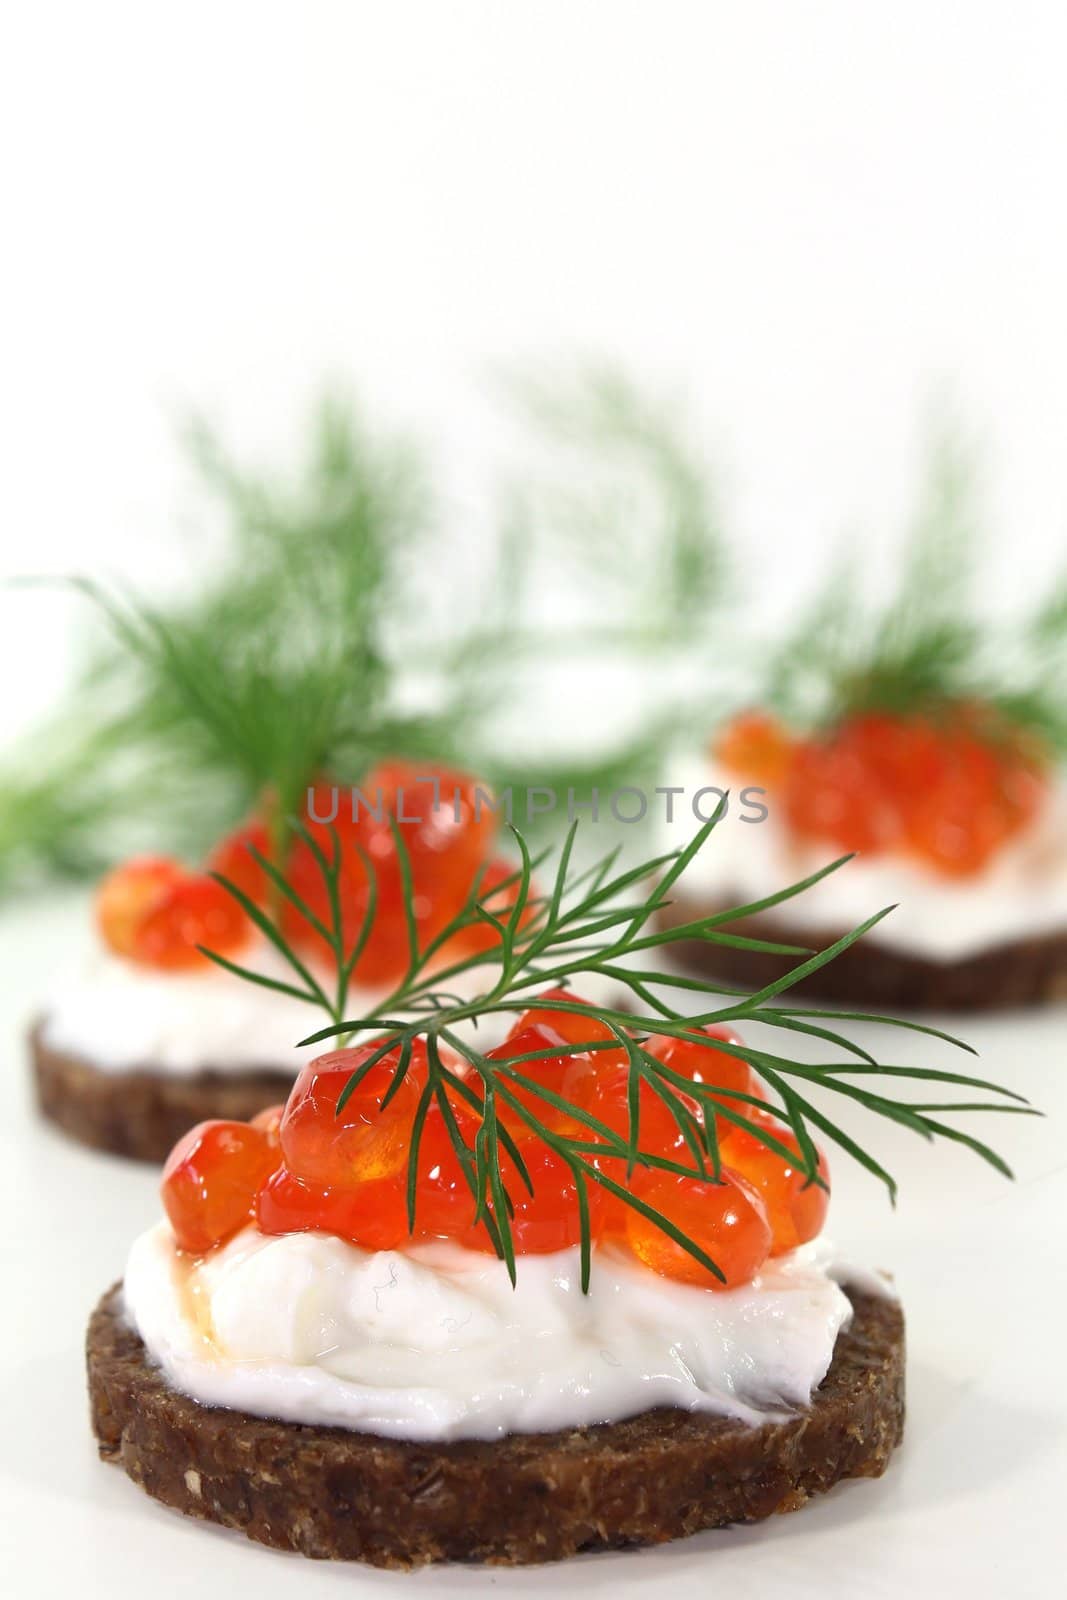 Canape with caviar by silencefoto